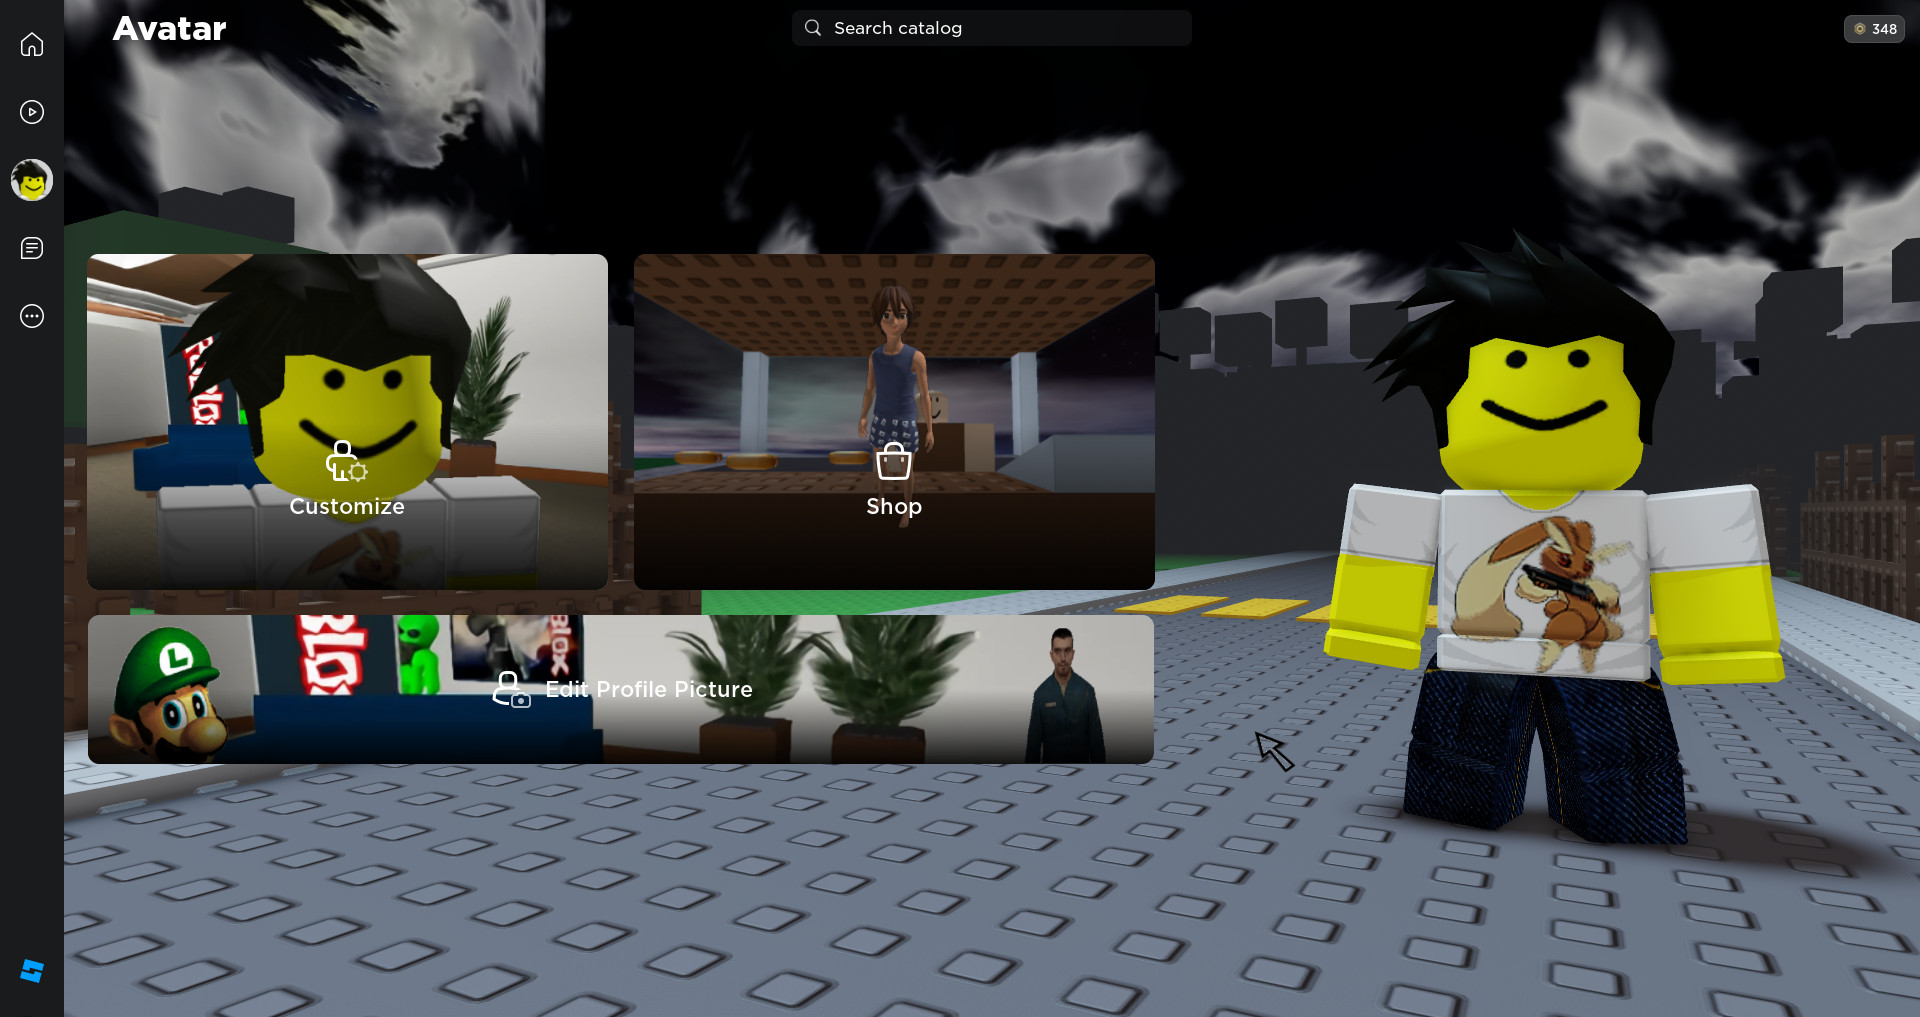 NEW ROBLOX Avatar Editor Update! No one noticed it!? 